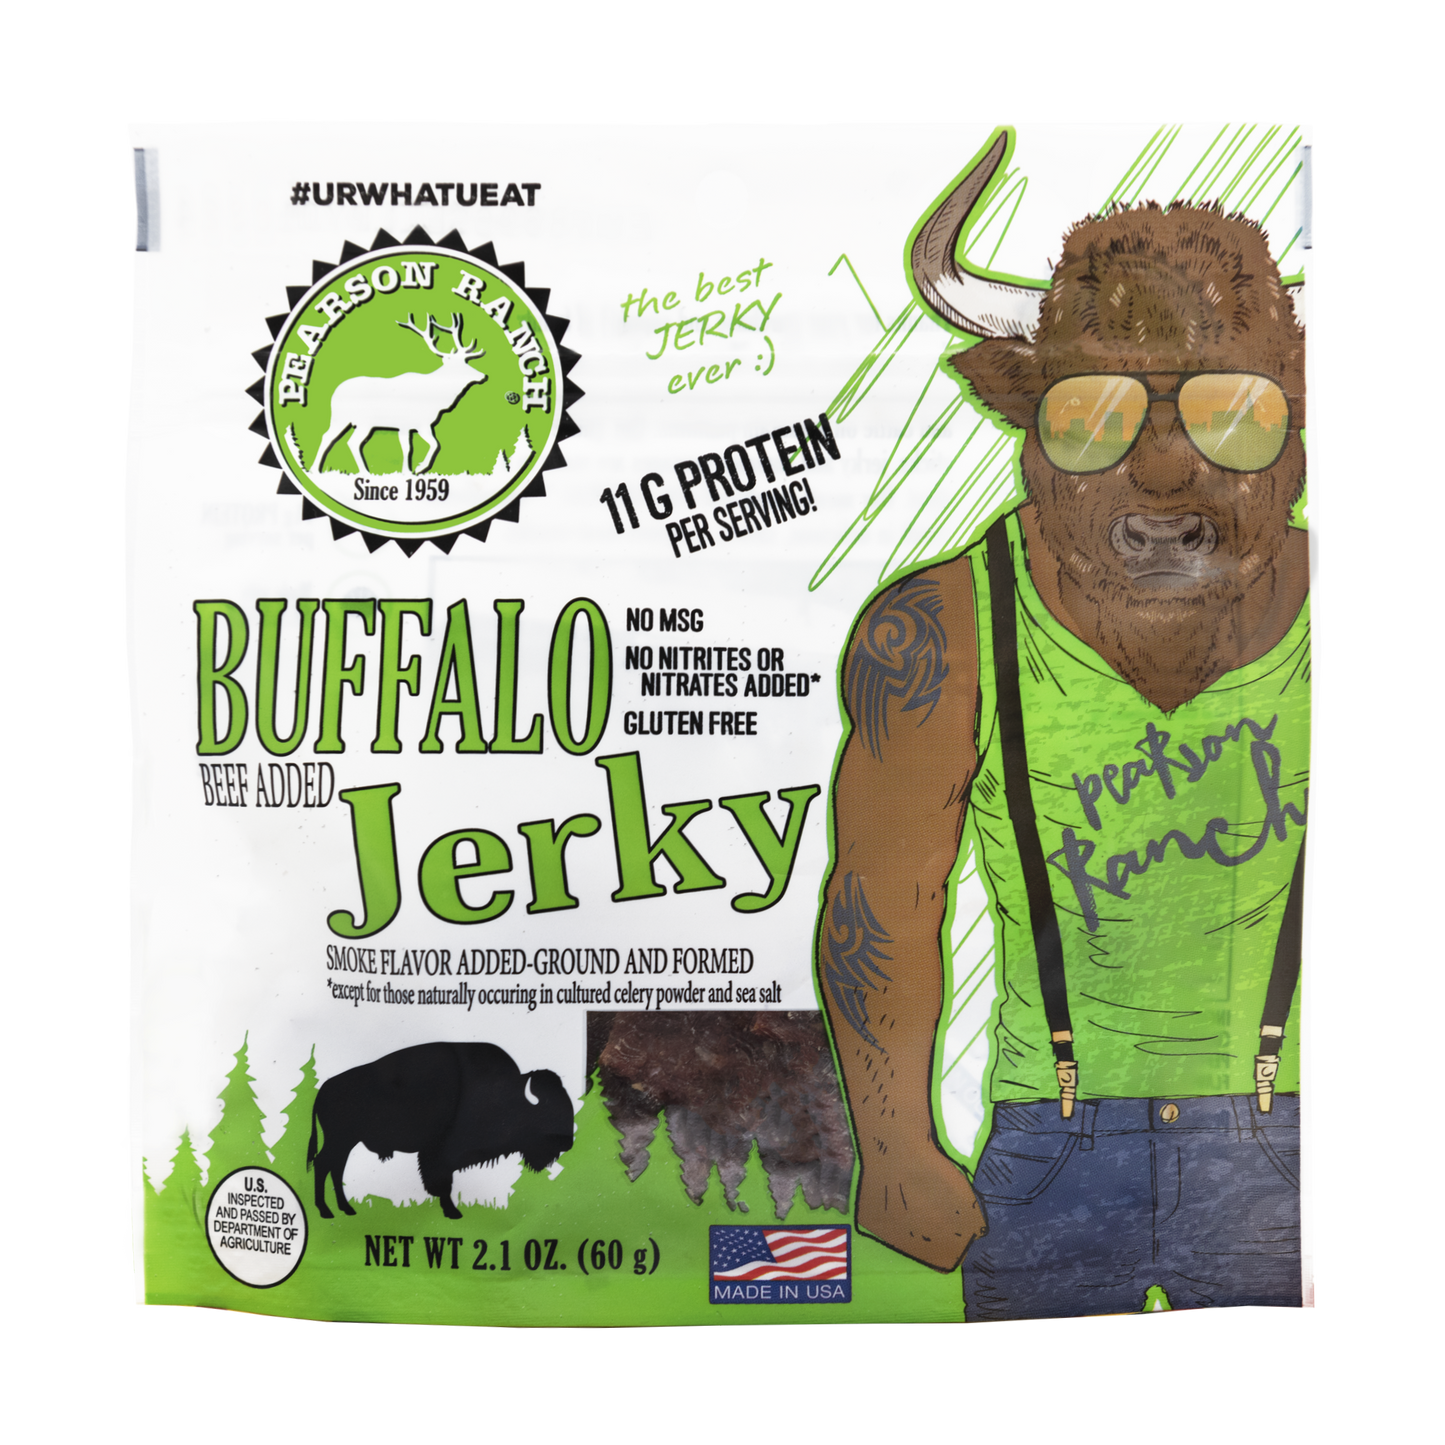 
                  
                    The Trail Boss - "Round Up" Variety Pack - Pearson Ranch Jerky
                  
                